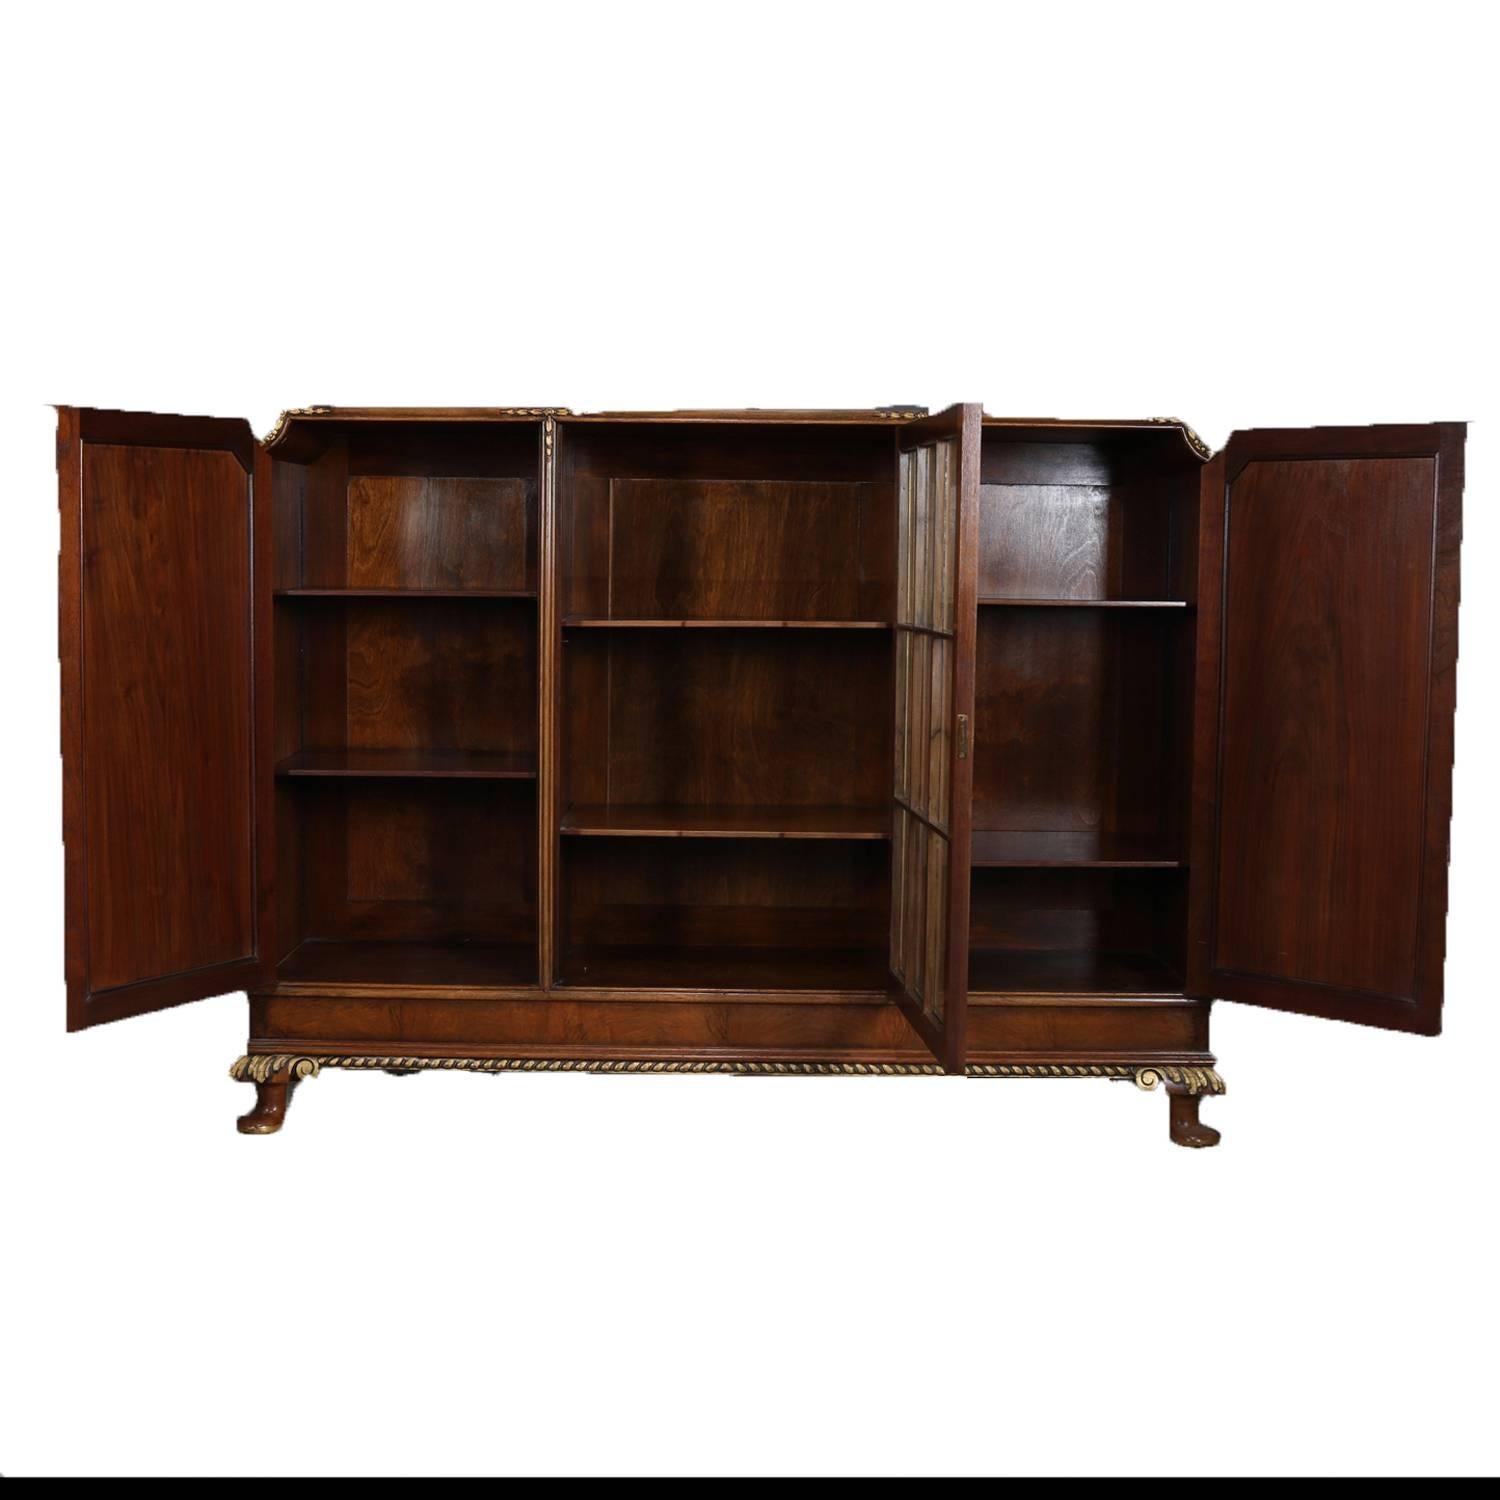 Carved Antique French Louis XV Style Banded, Gilt Burl Walnut Three-Door Bookcase c1900